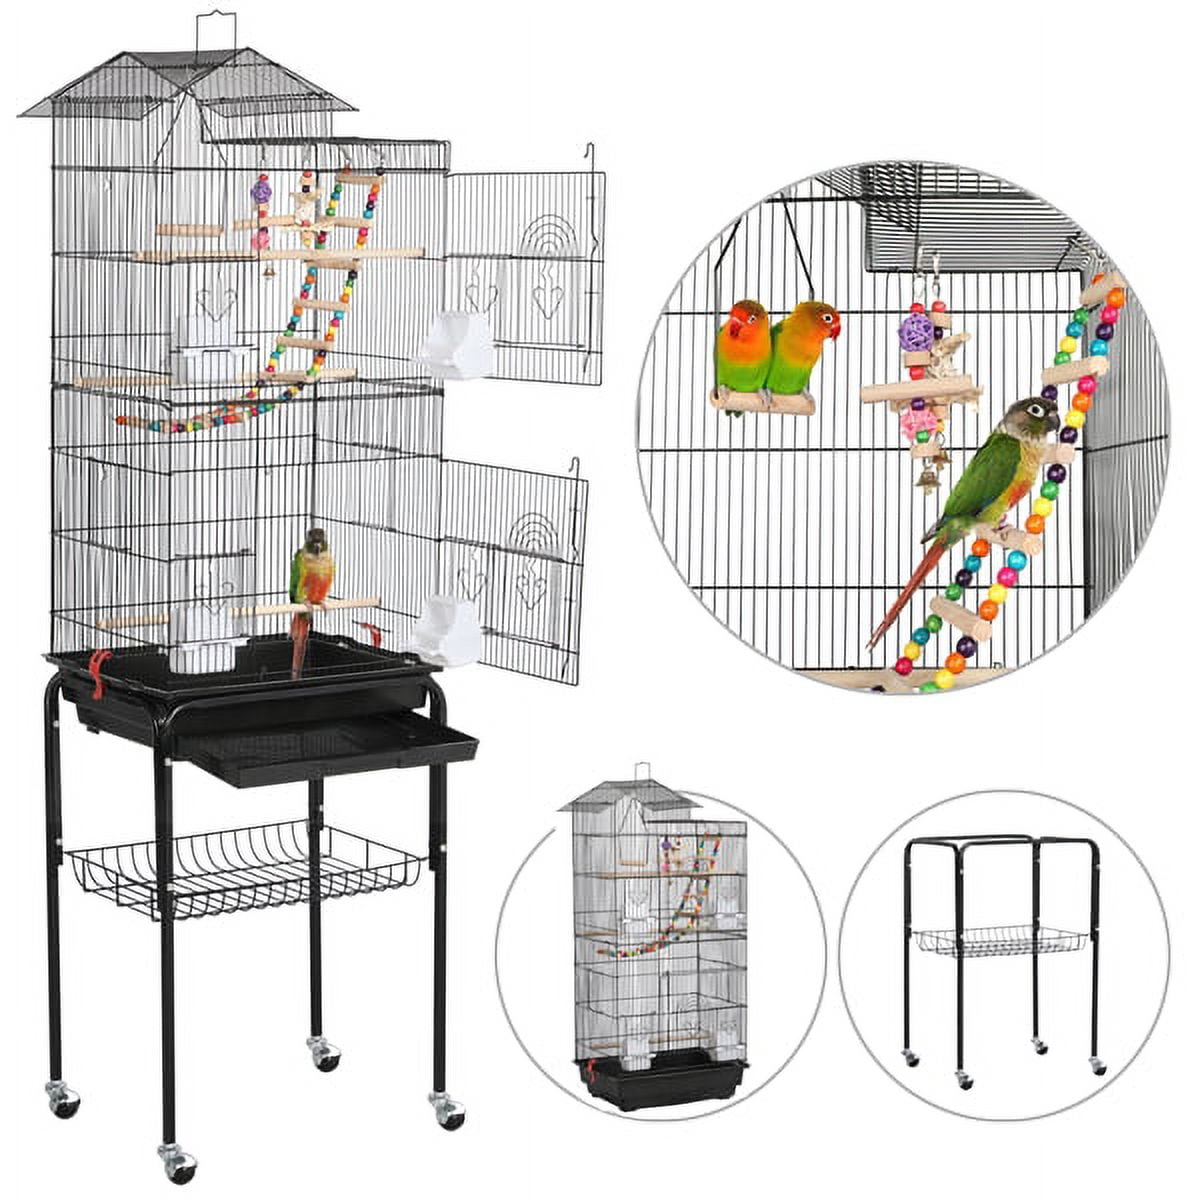 Alden Design 62.4 Rolling Mid-Size Bird Cage with Perches, Black 